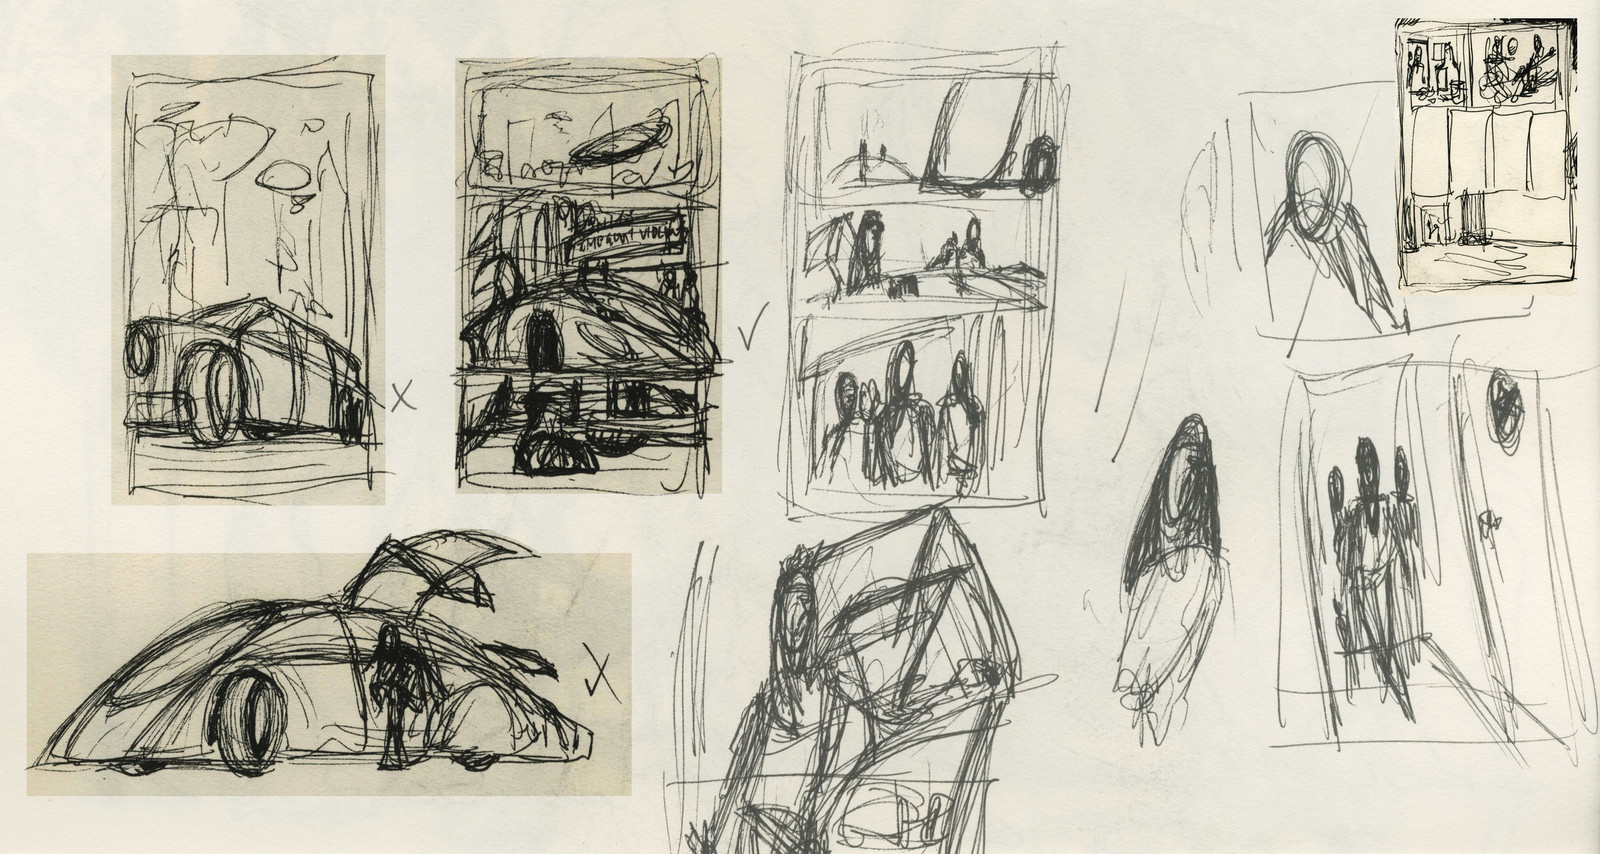 "Arriving at the gig..." - Roughs and thumbnails.